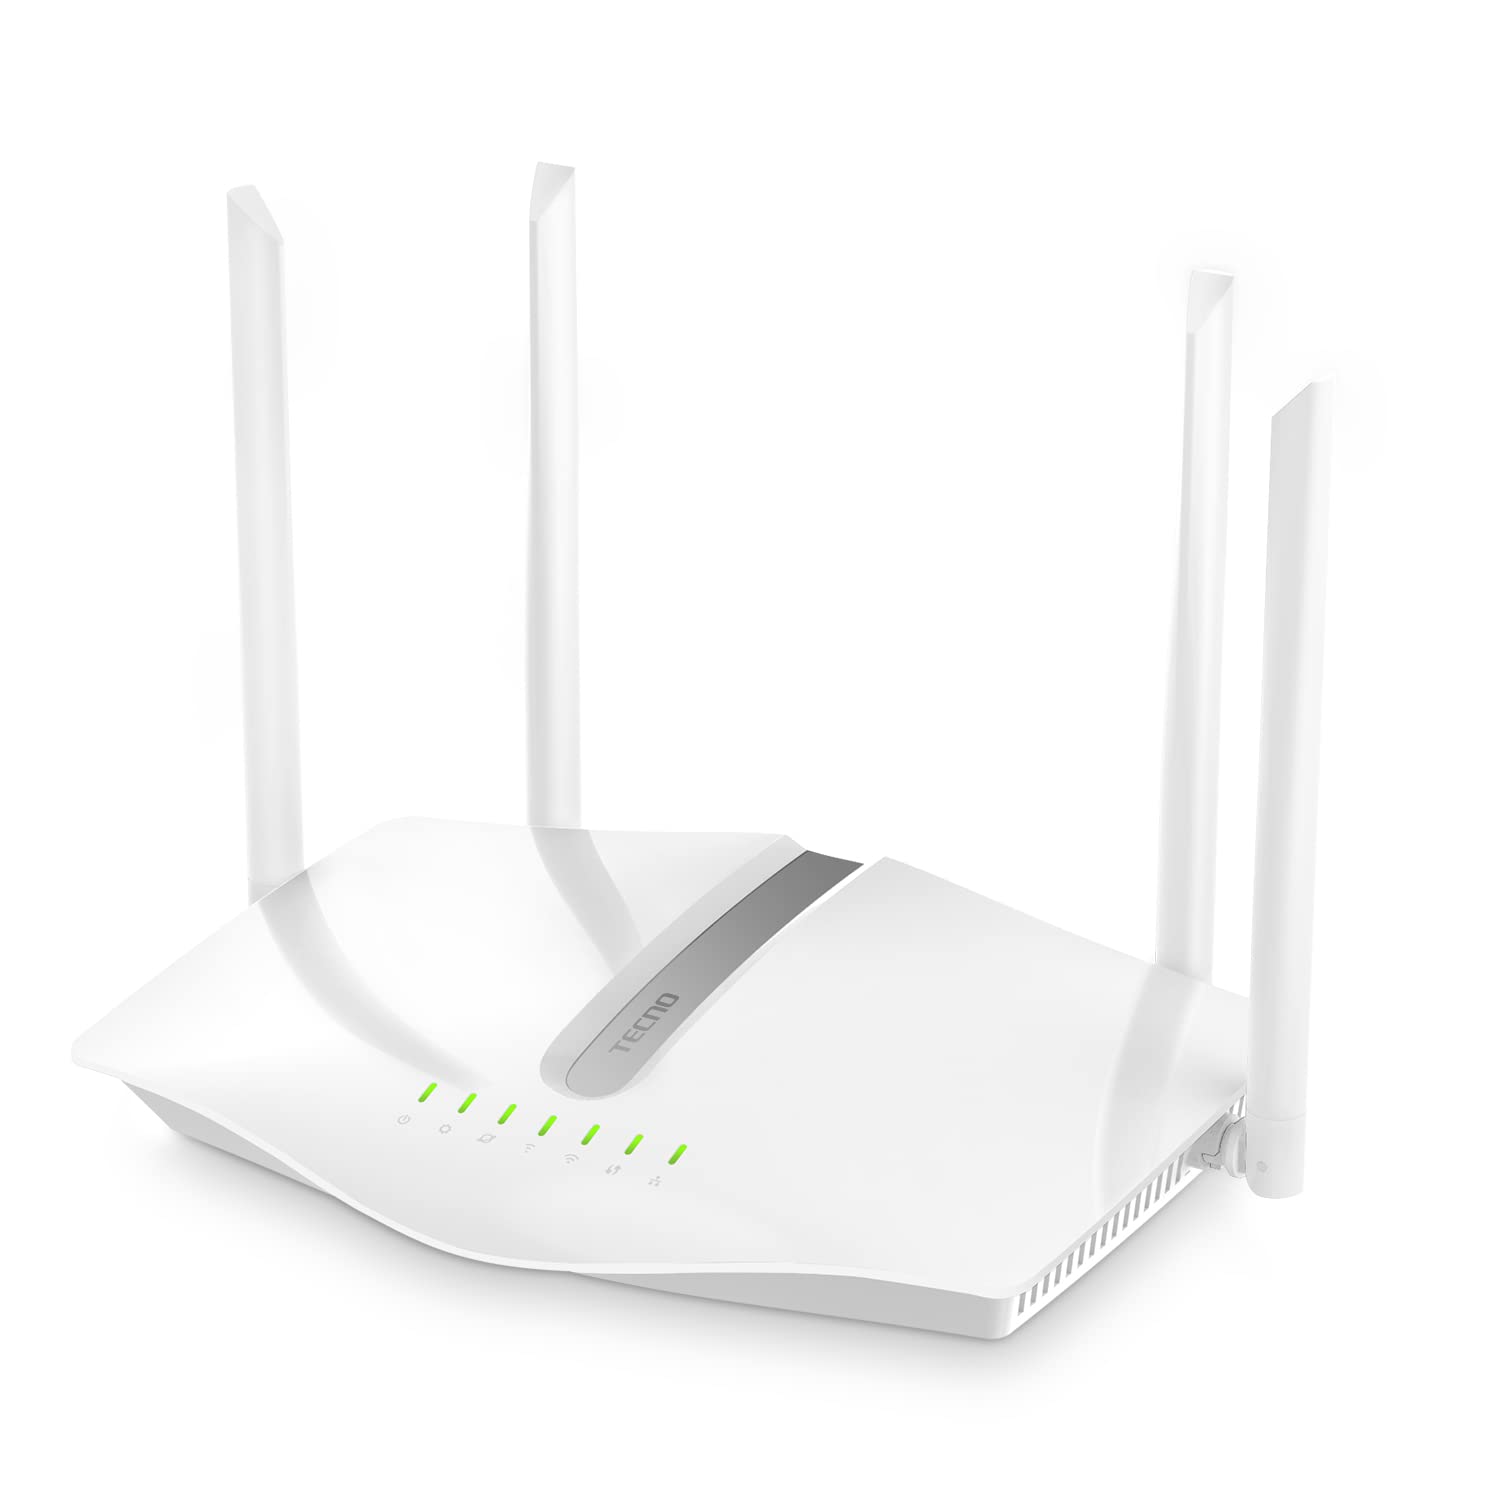 WiFi router with both 2.4 GHz and 5 GHz bands